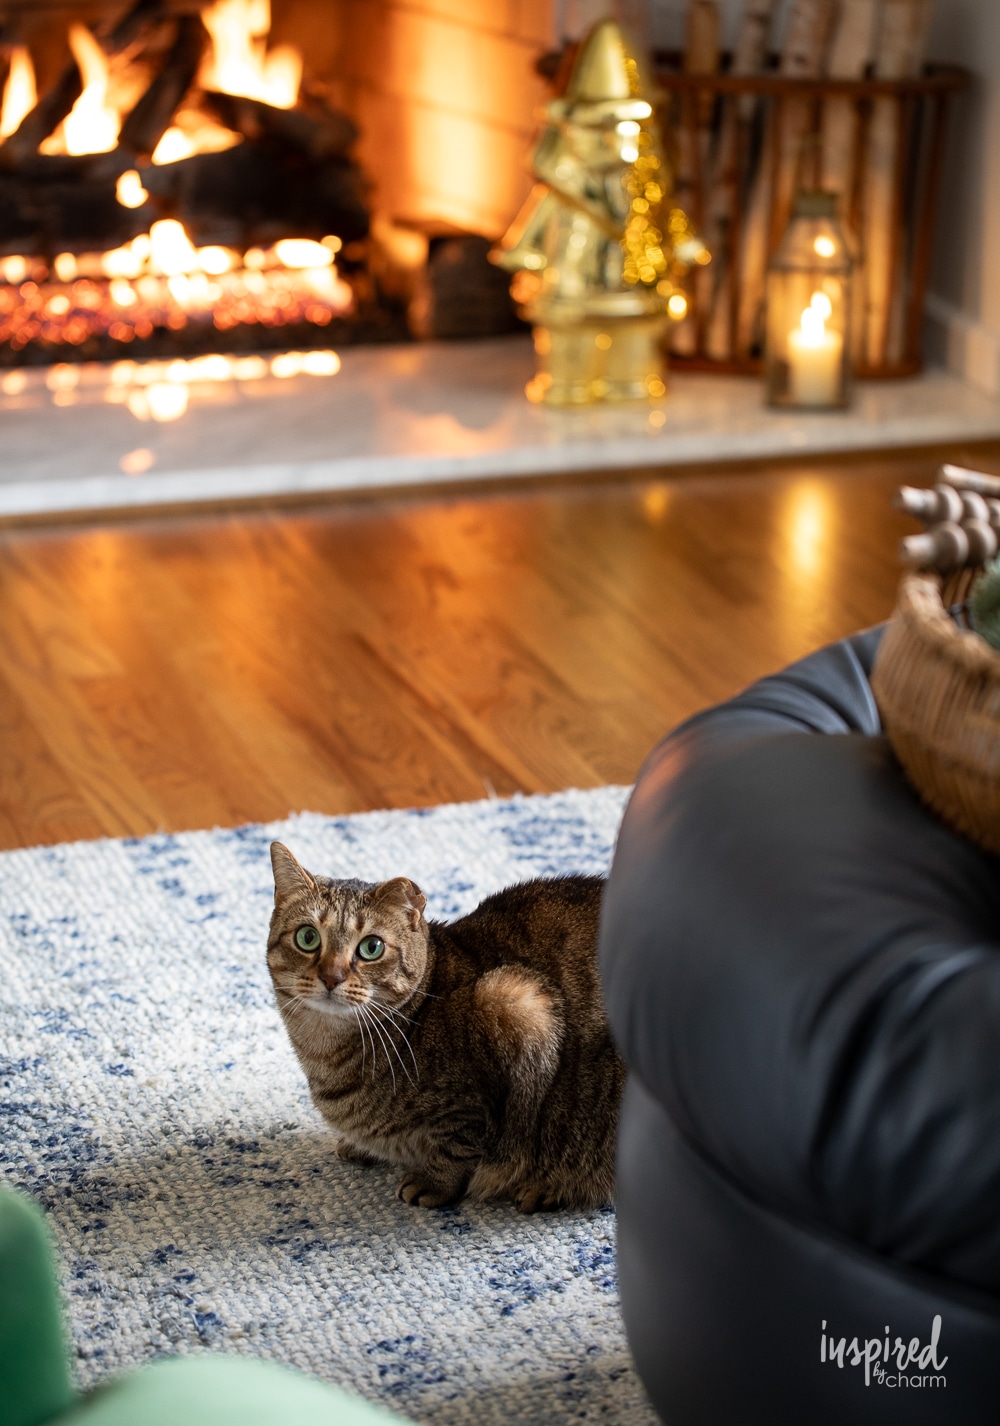 Leo cat in front of a fire place.